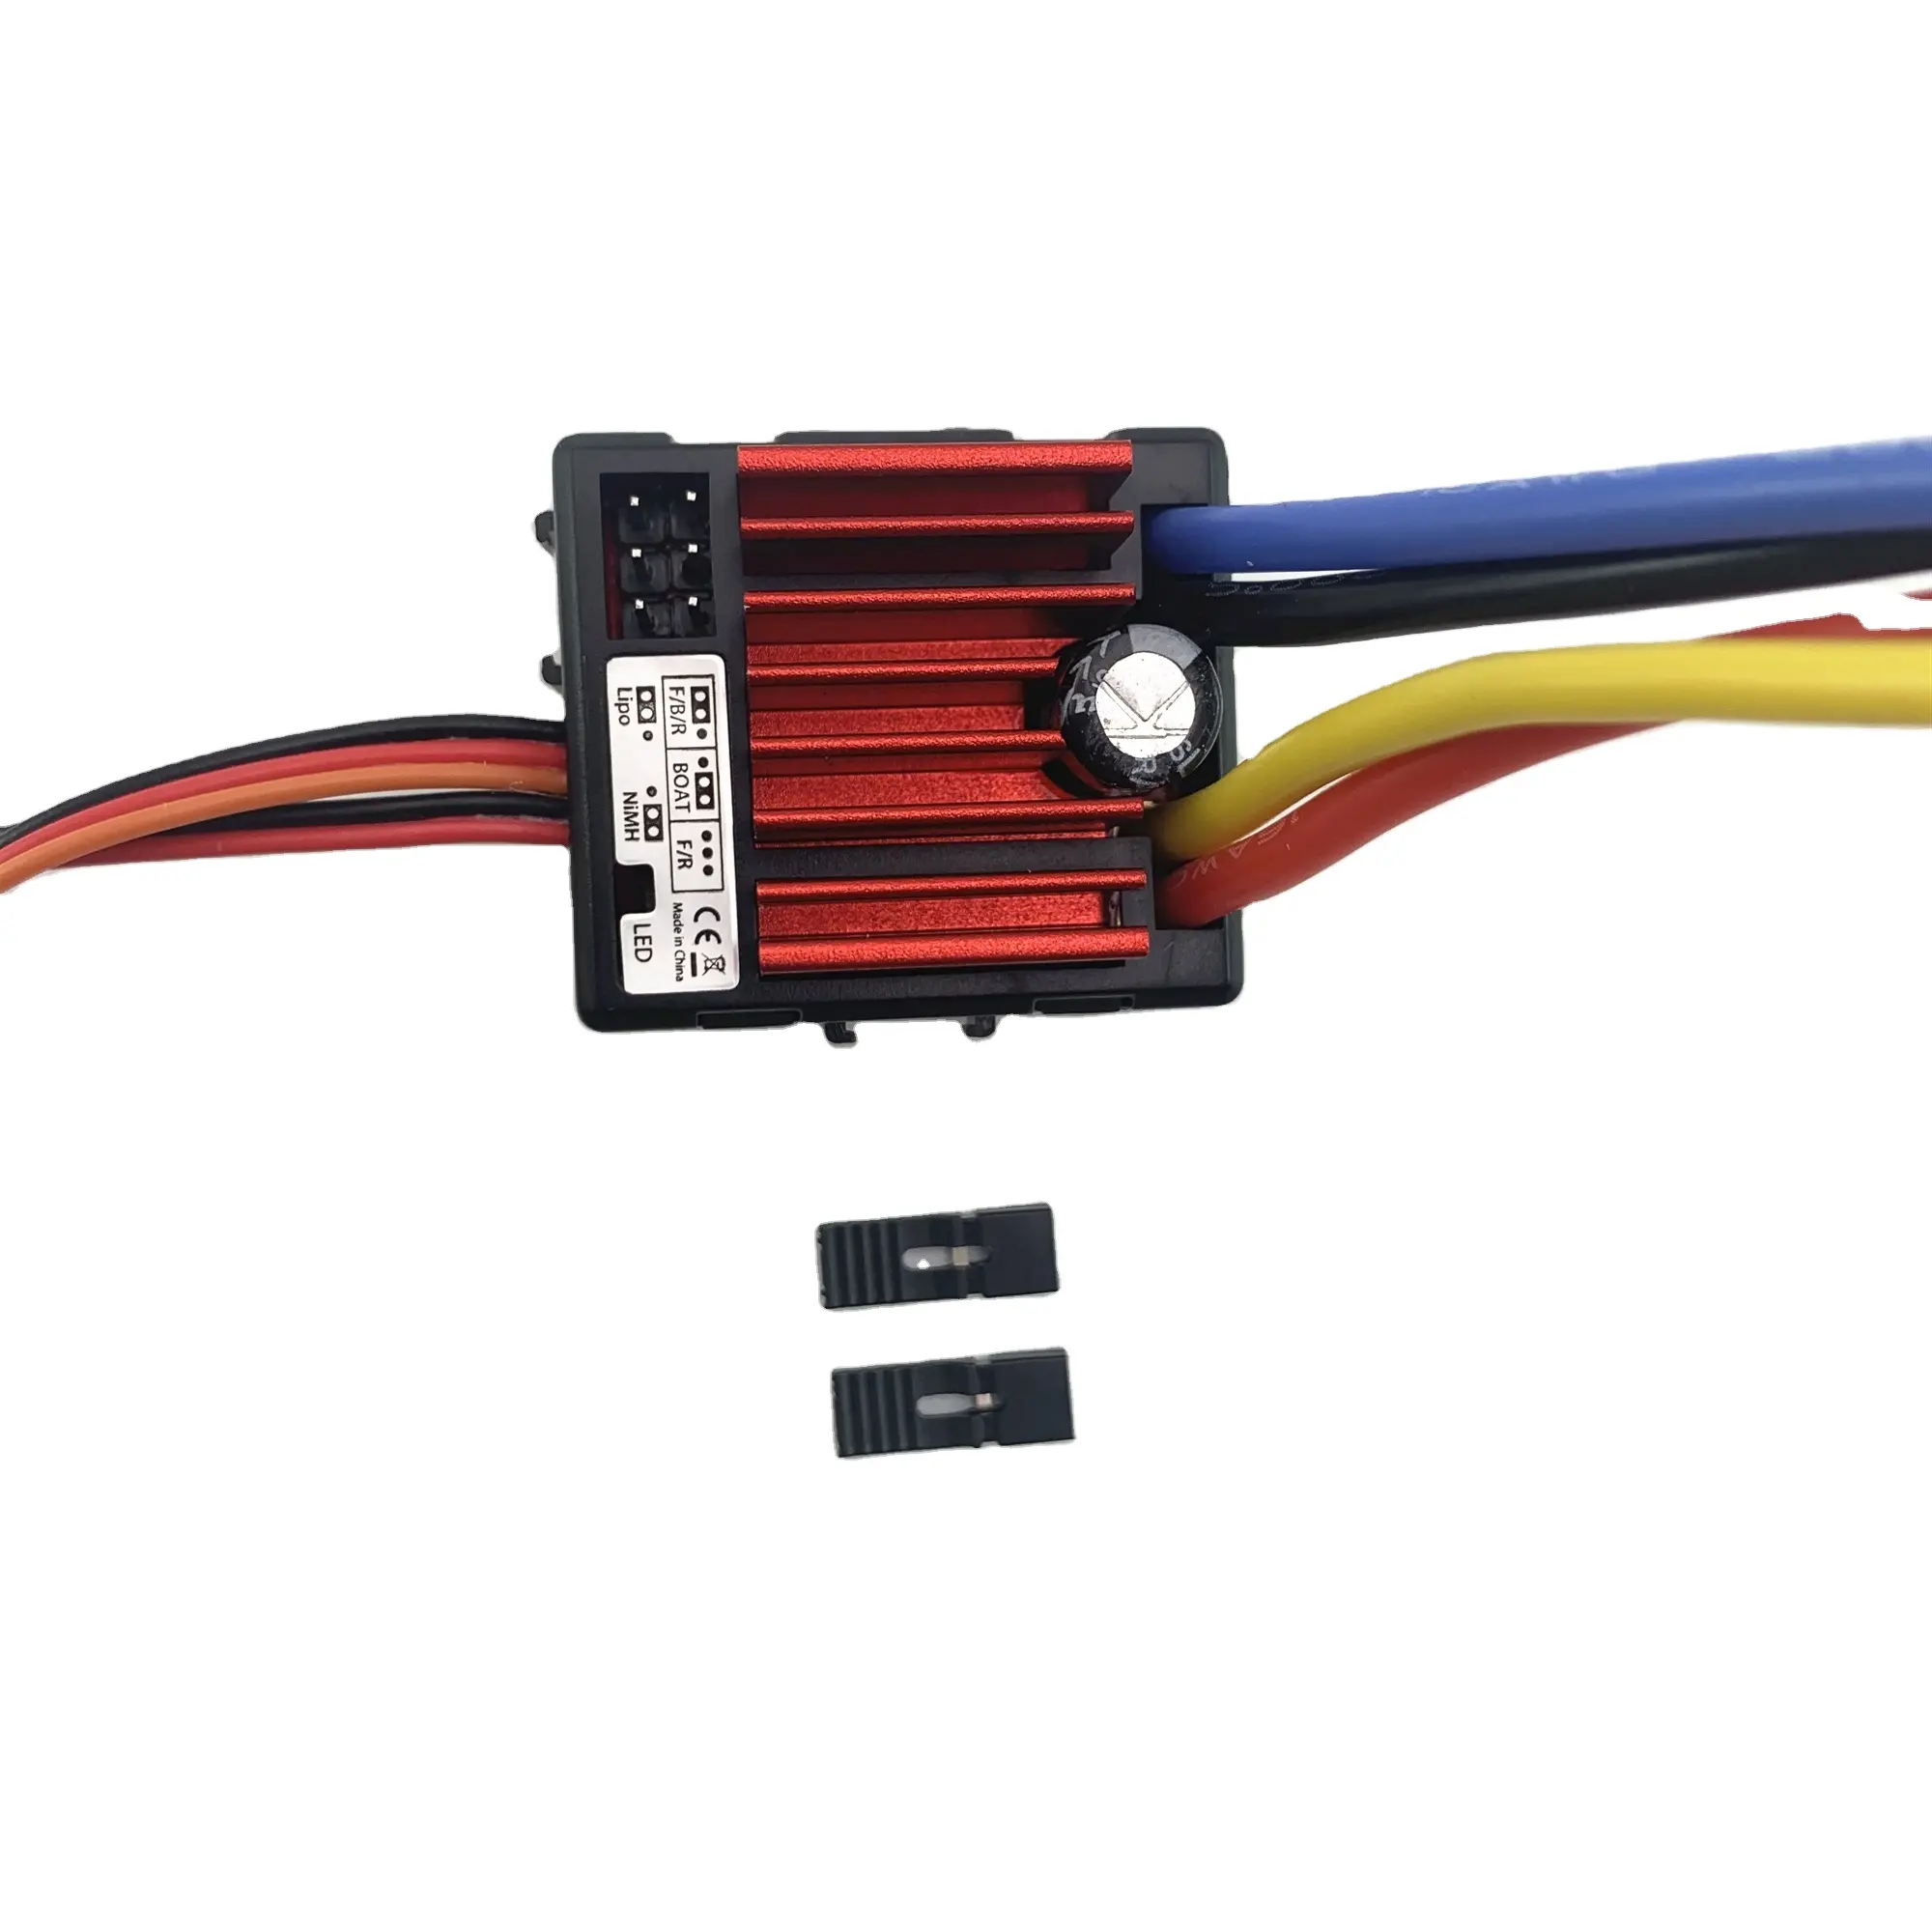 550 Brushed Motor 360A Brushed Electronic Speed Controller ESC for 1/10 RC Car